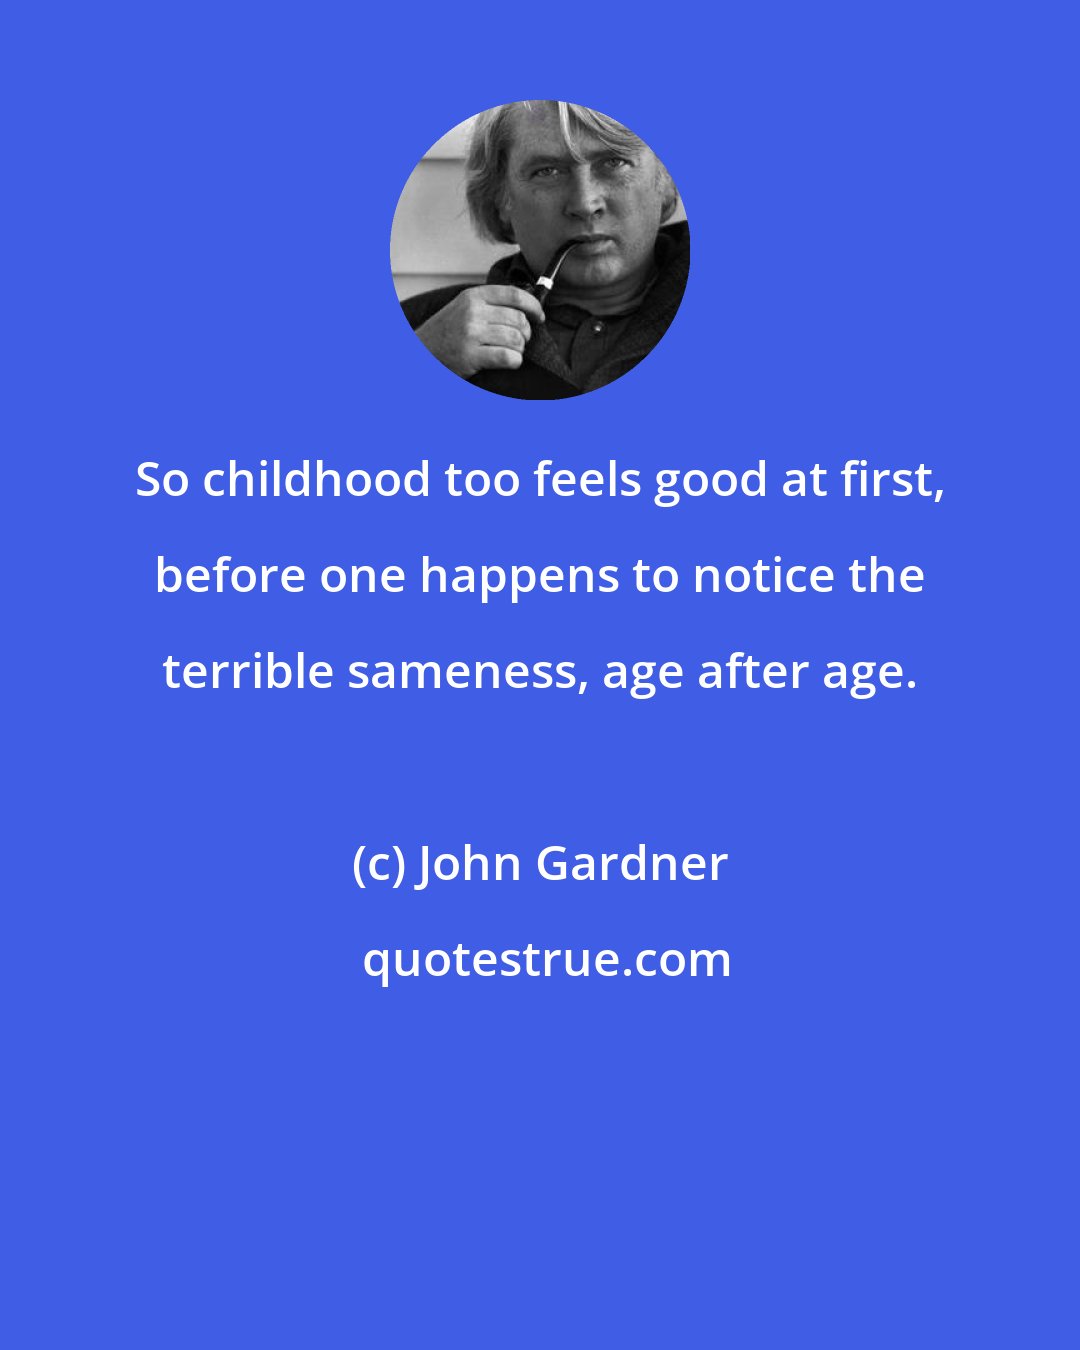 John Gardner: So childhood too feels good at first, before one happens to notice the terrible sameness, age after age.